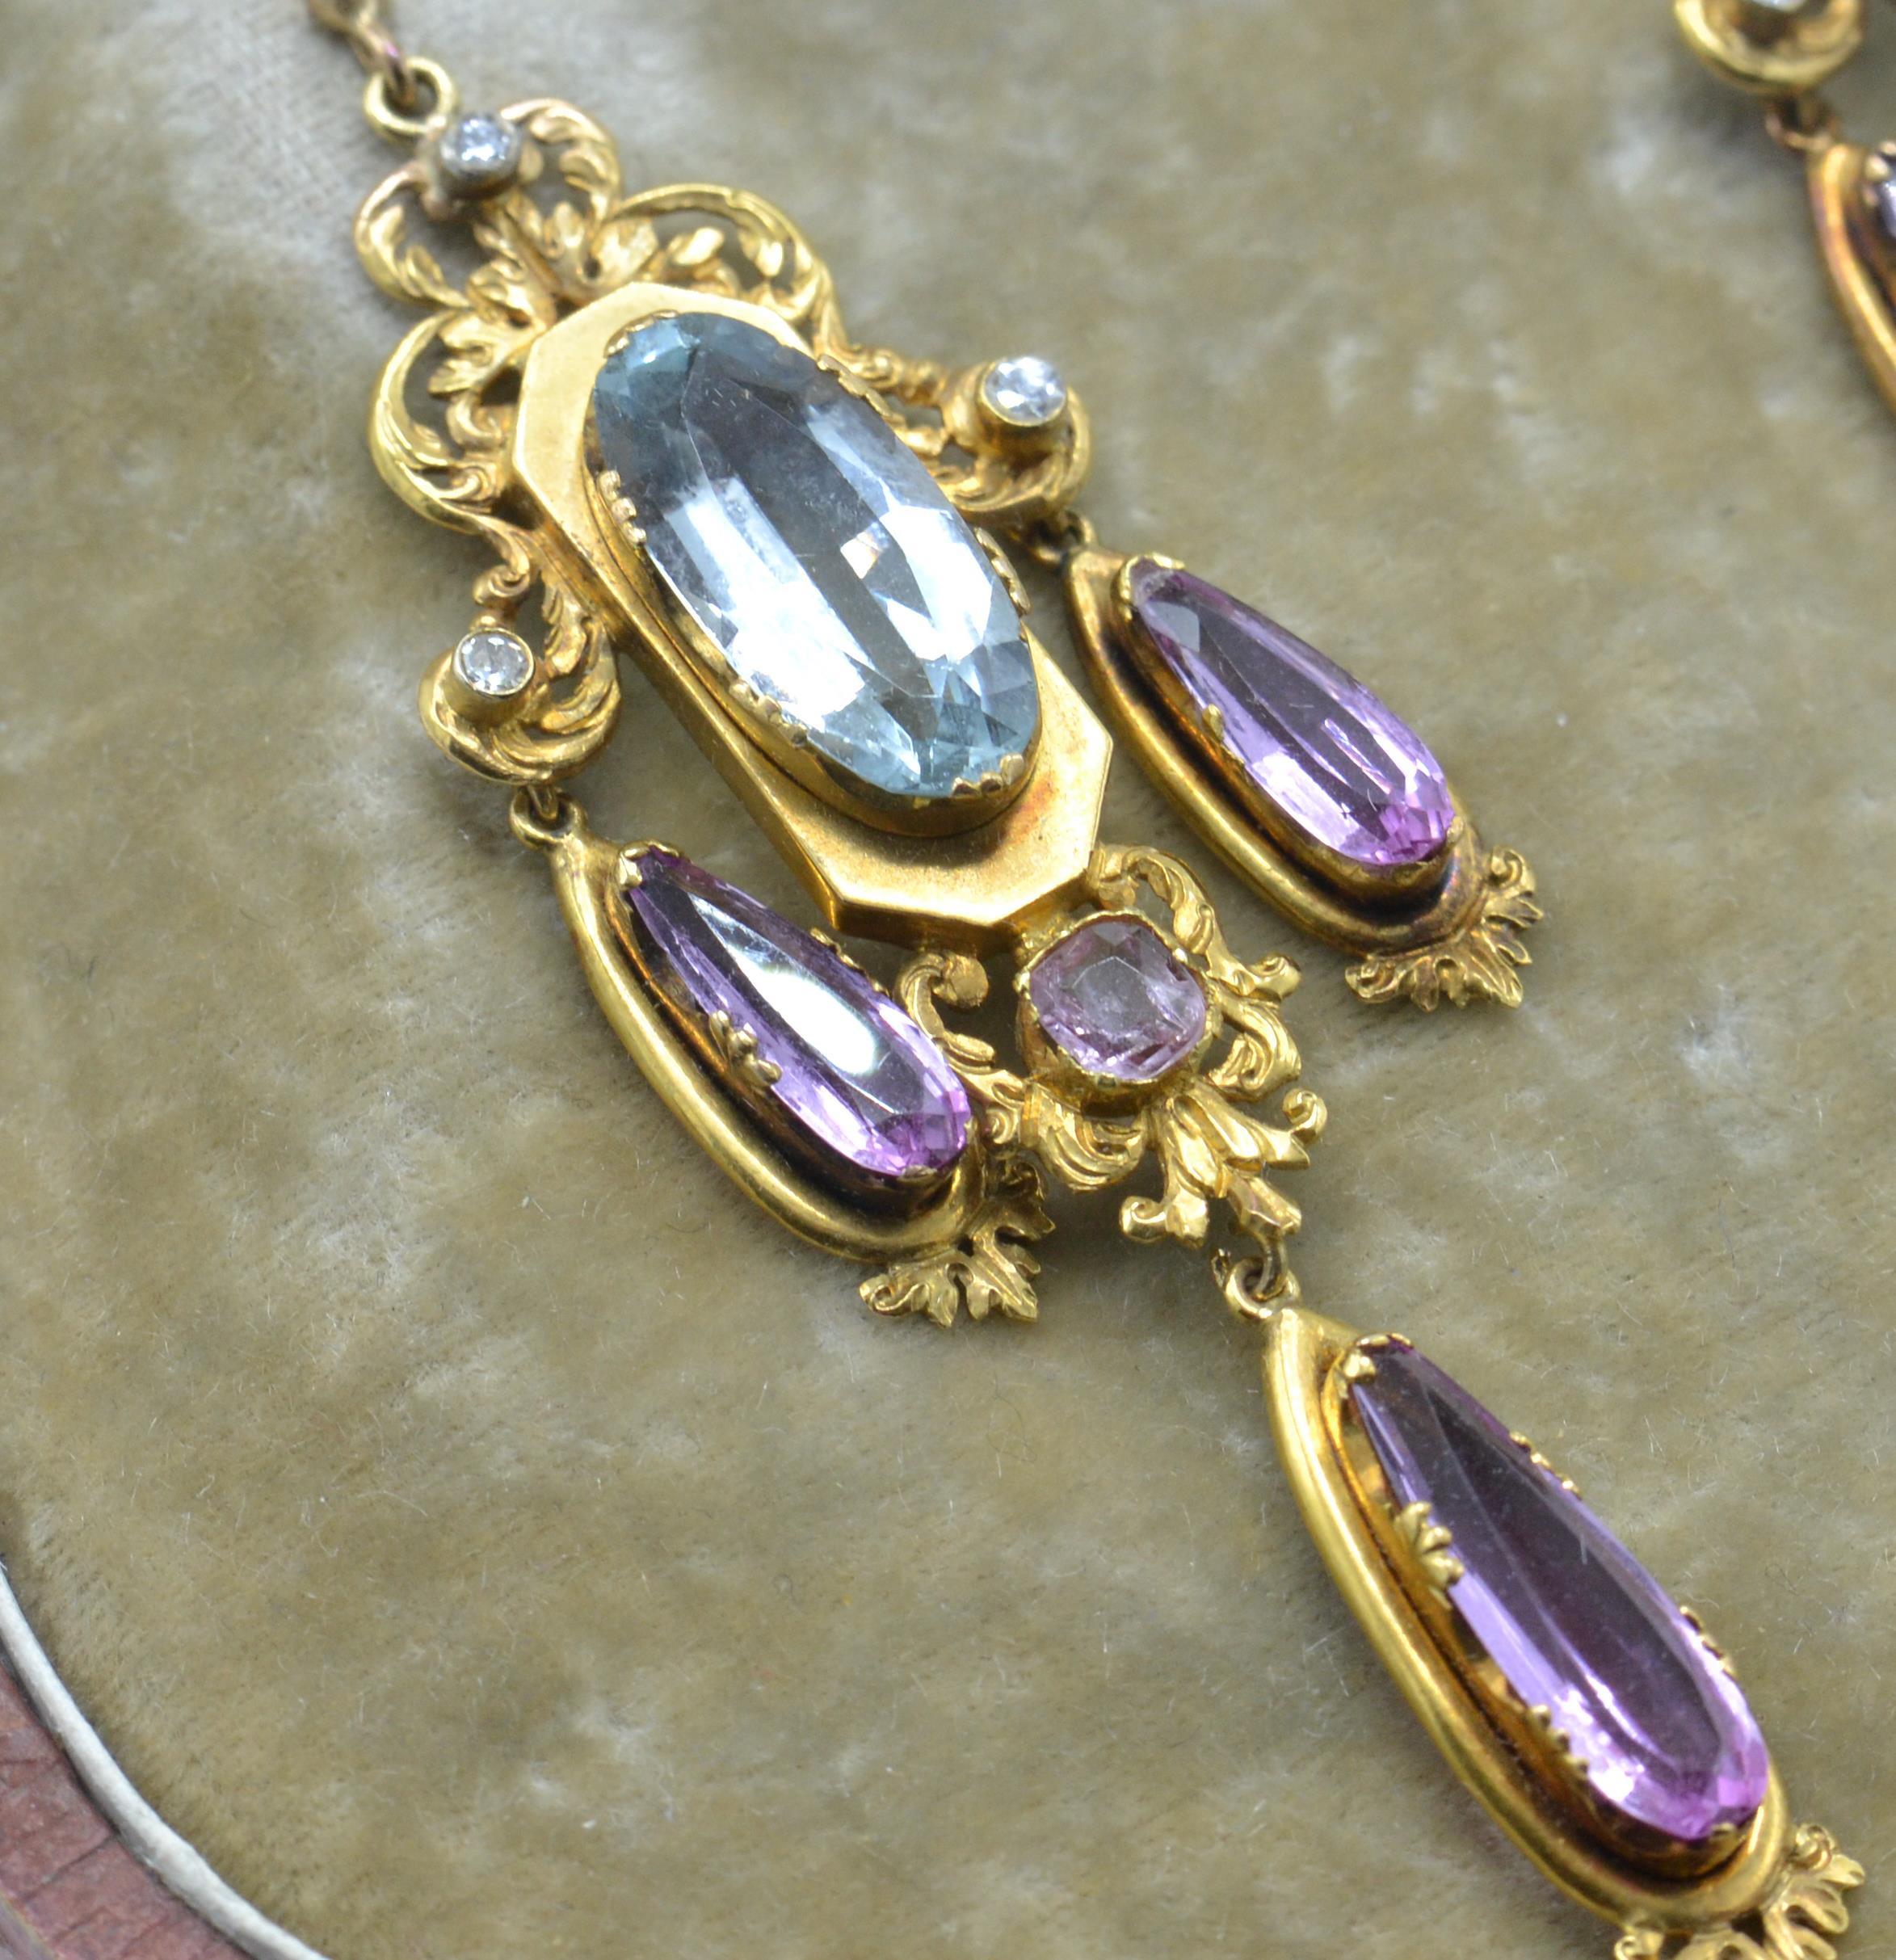 A cased 19th century gold, aquamarine, pink topaz and diamond brooch and earring suite. - Image 6 of 9